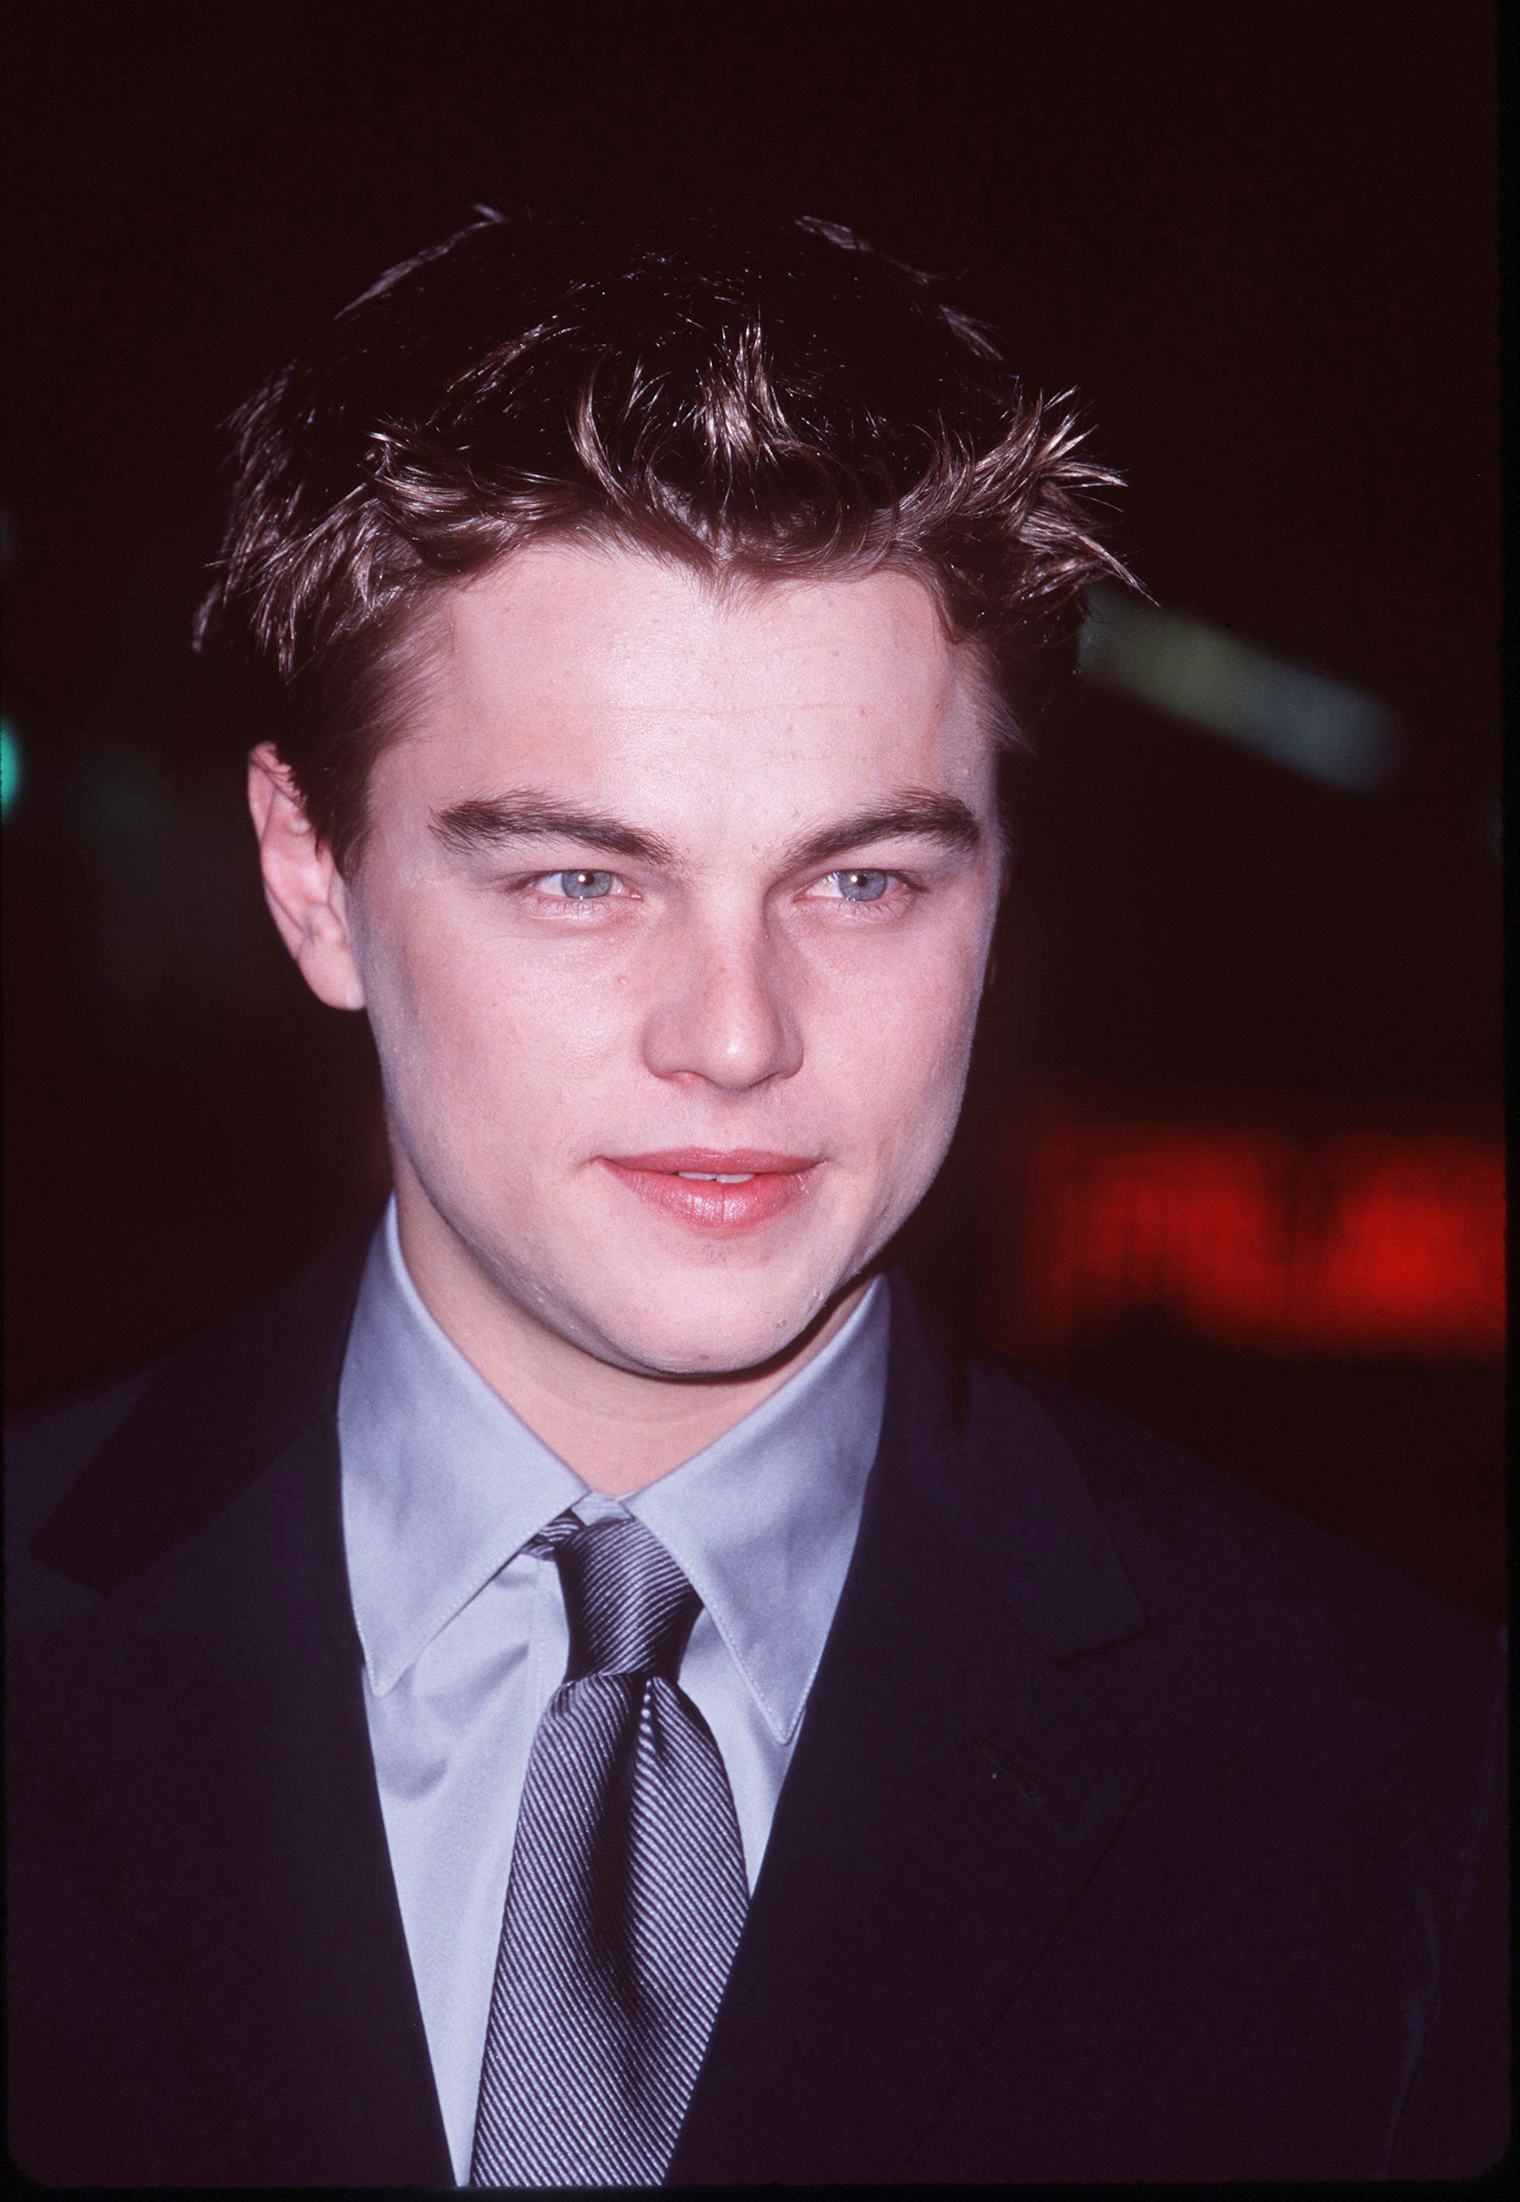 18 Photos From The 1997 'Titanic' Premiere That Will Make You Feel Old